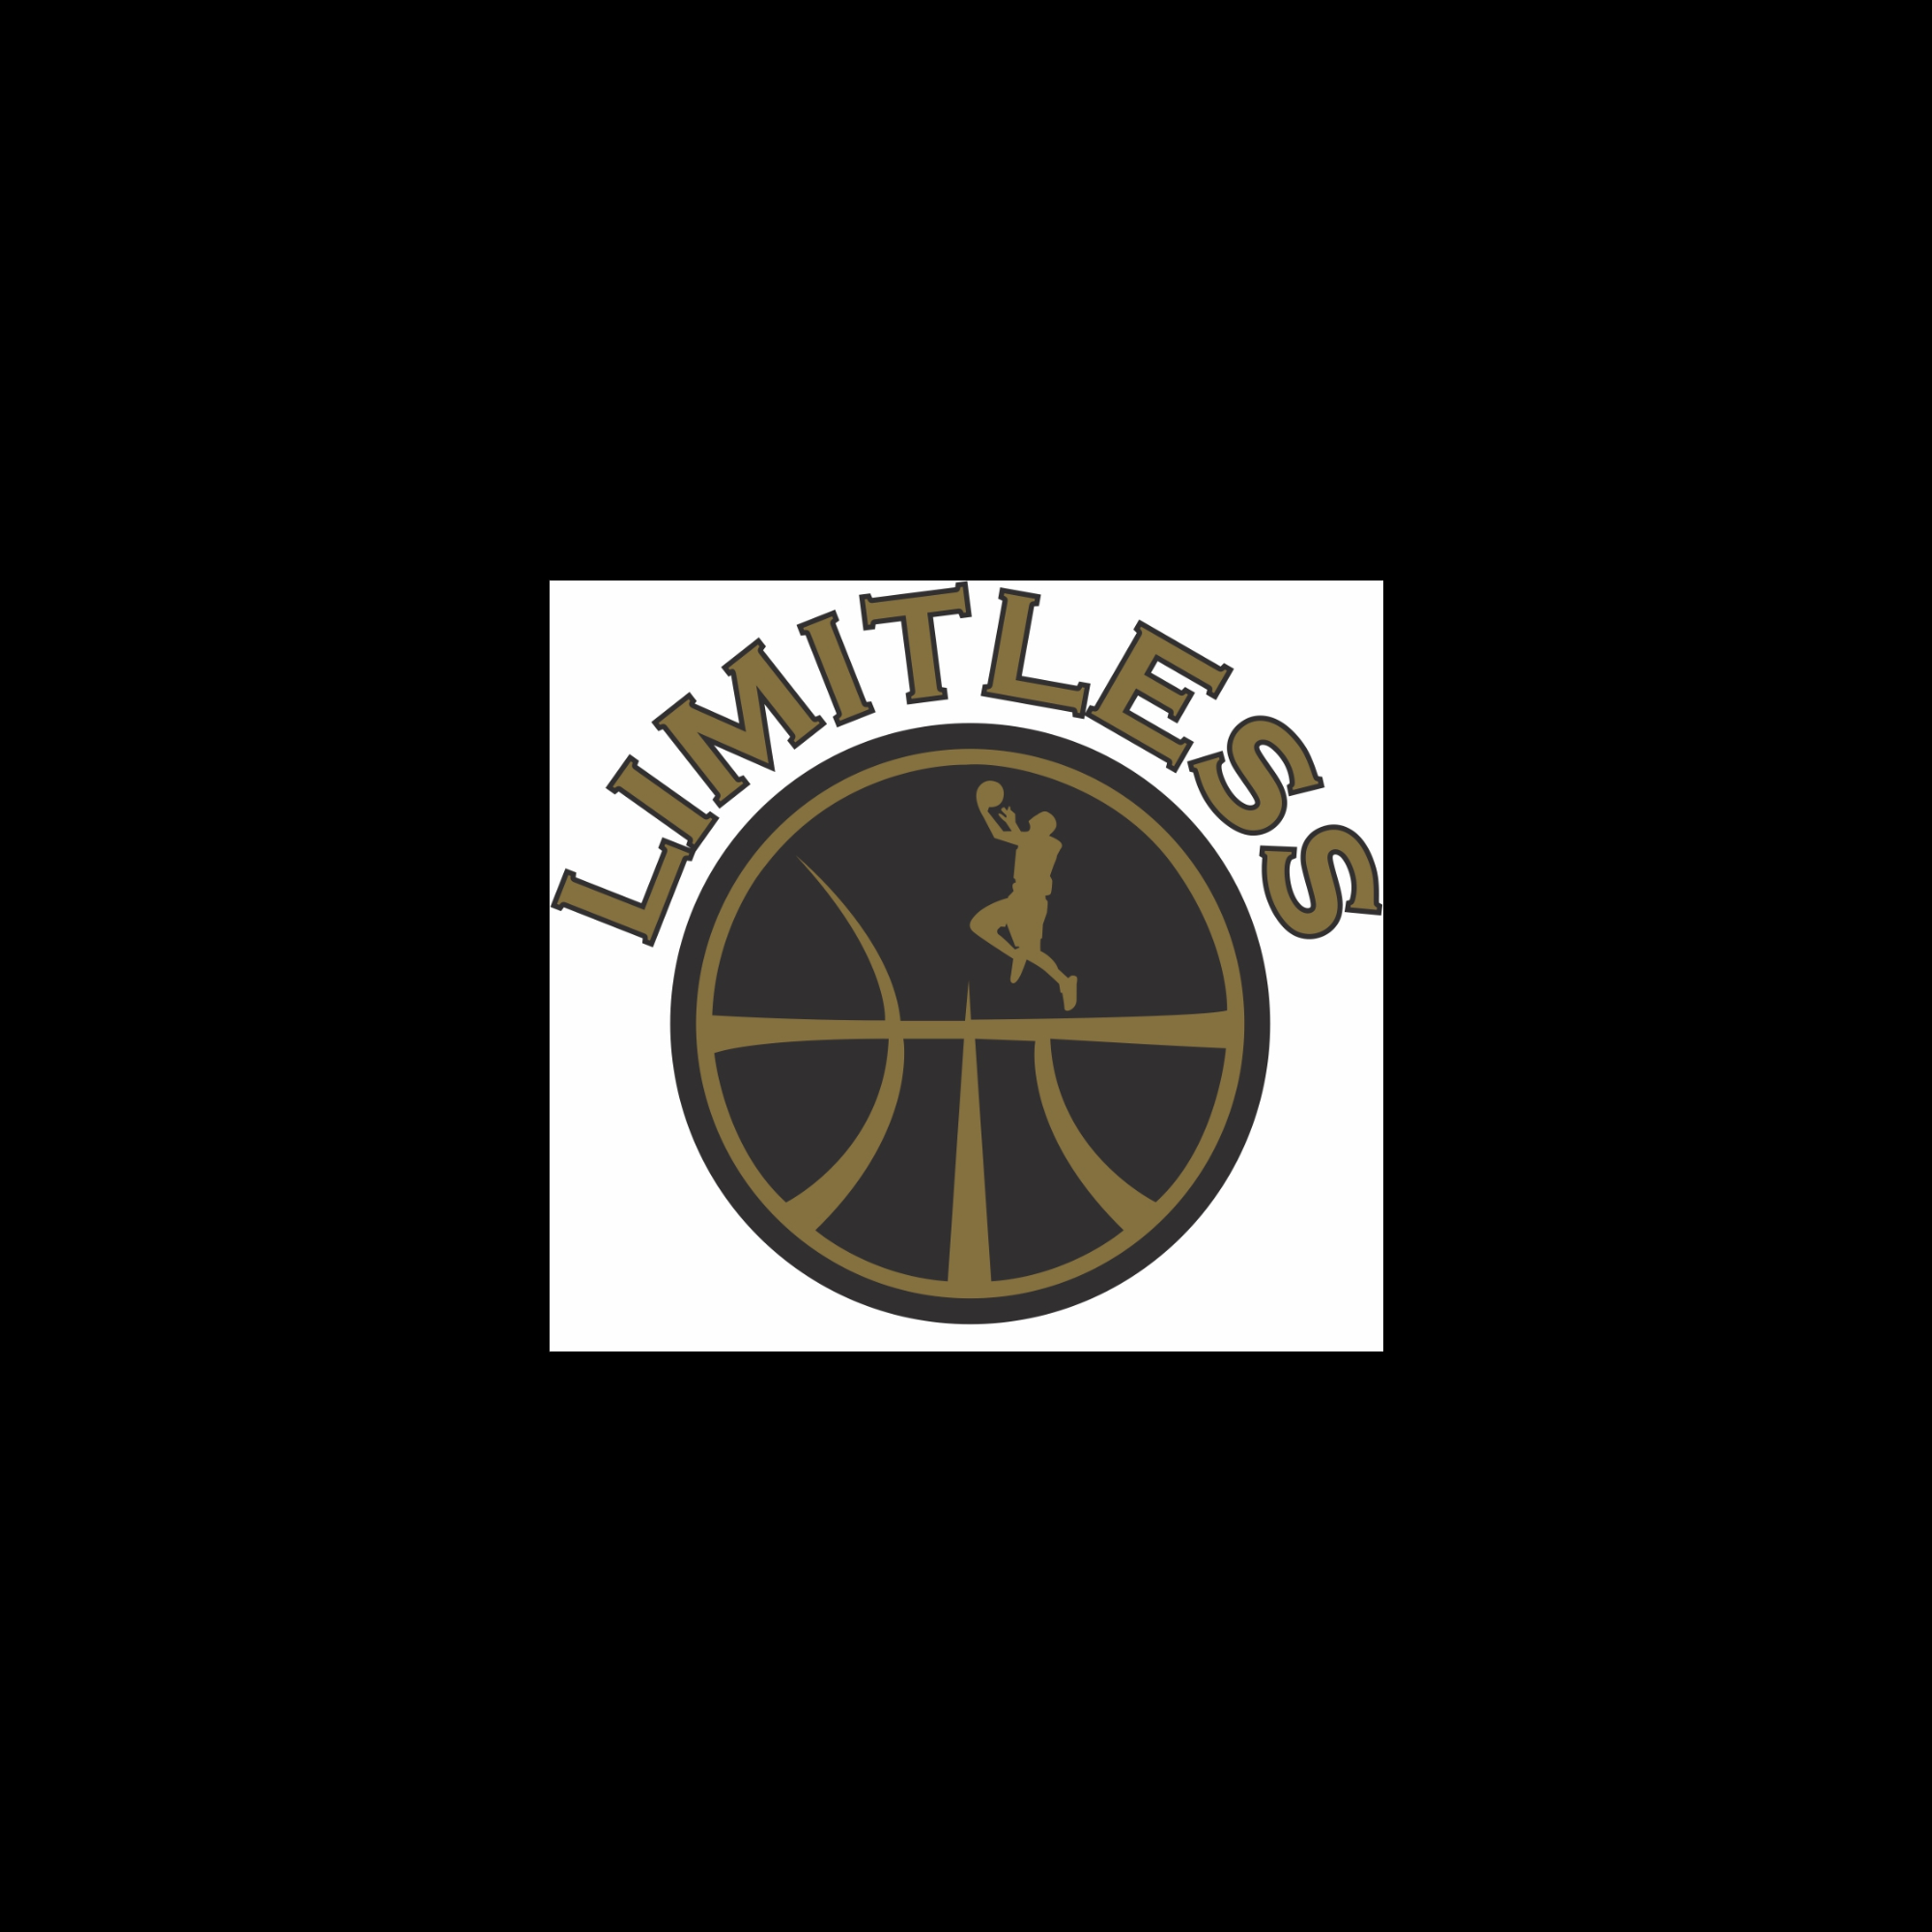 The official logo of Limitless